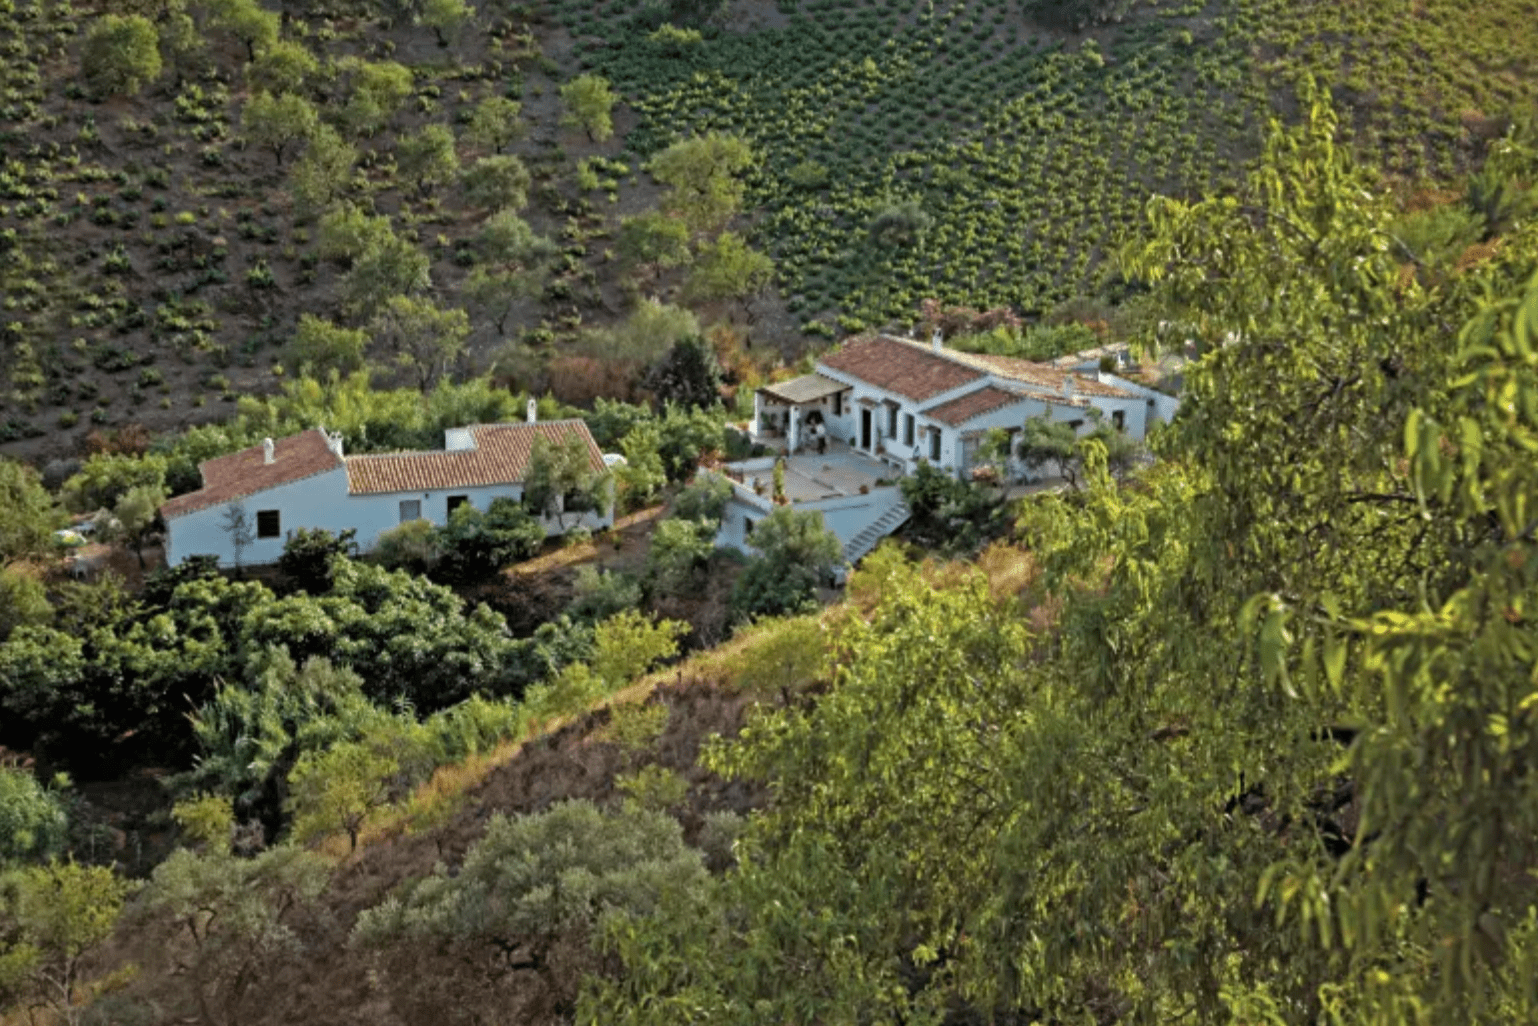 Andalusian Country Estate for Sale – Licensed 3 Star Hotel with 32 Years of Proven Success